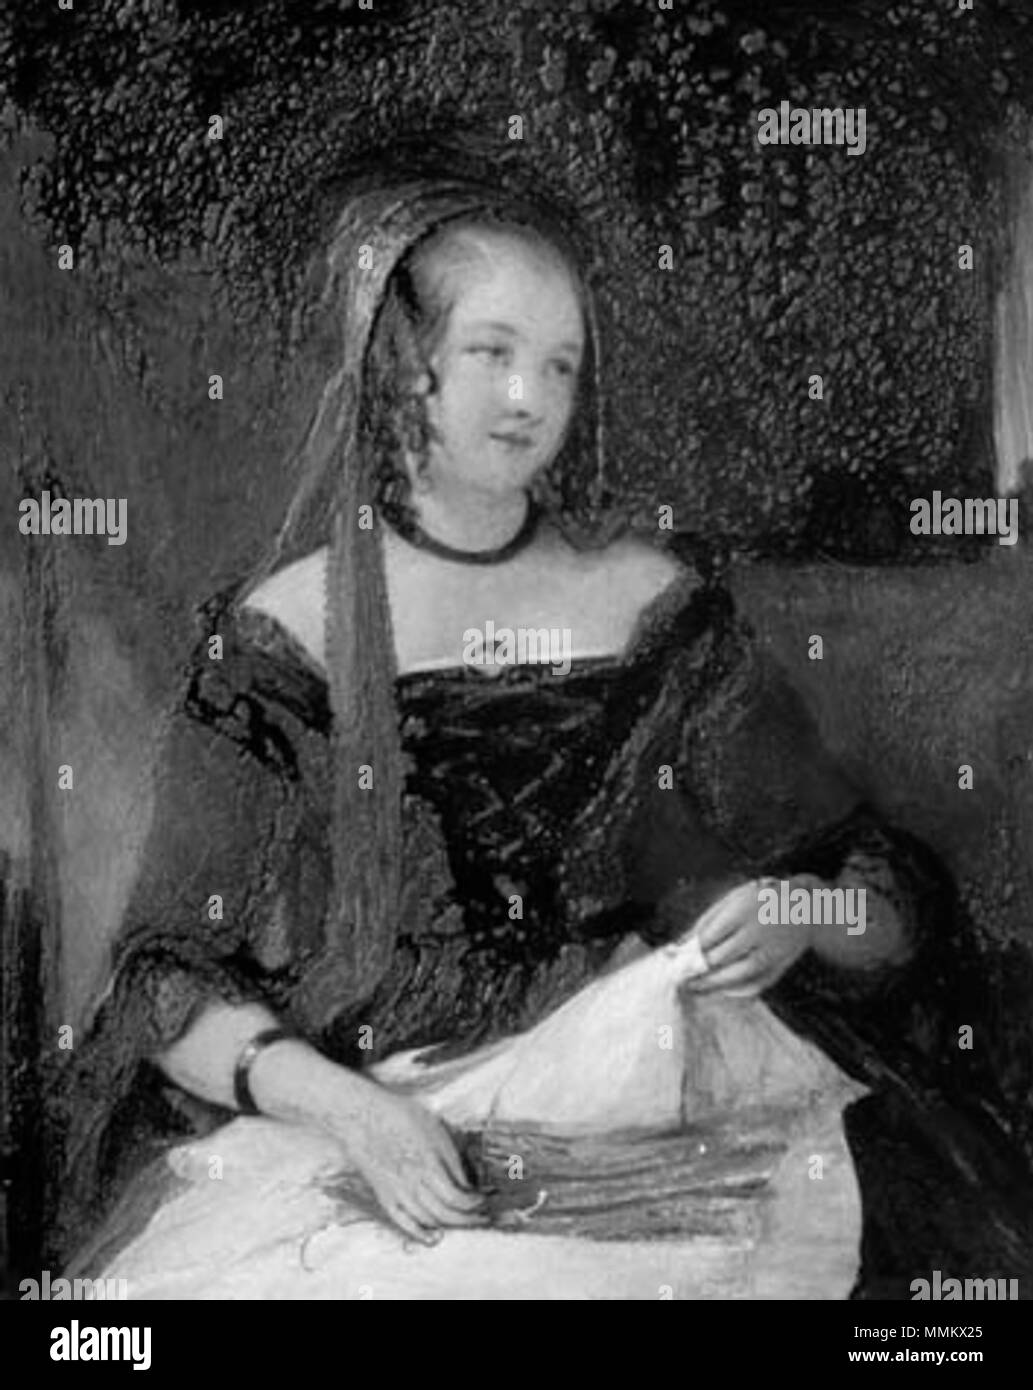 .  English: Arethusa Susannah, daughter of Sir Thomas Gery Cullum of Hardwick House, Suffolk, and wife of Thomas Milner Gibson. Courtesy of the Spanton Sparman Collection, Bury St Edmunds Past and Present Society.  Portrait of Arethusa Susannah Cullum (1814-1885). circa 1837. Arethusa Susannah Milner Gibson portrait Stock Photo